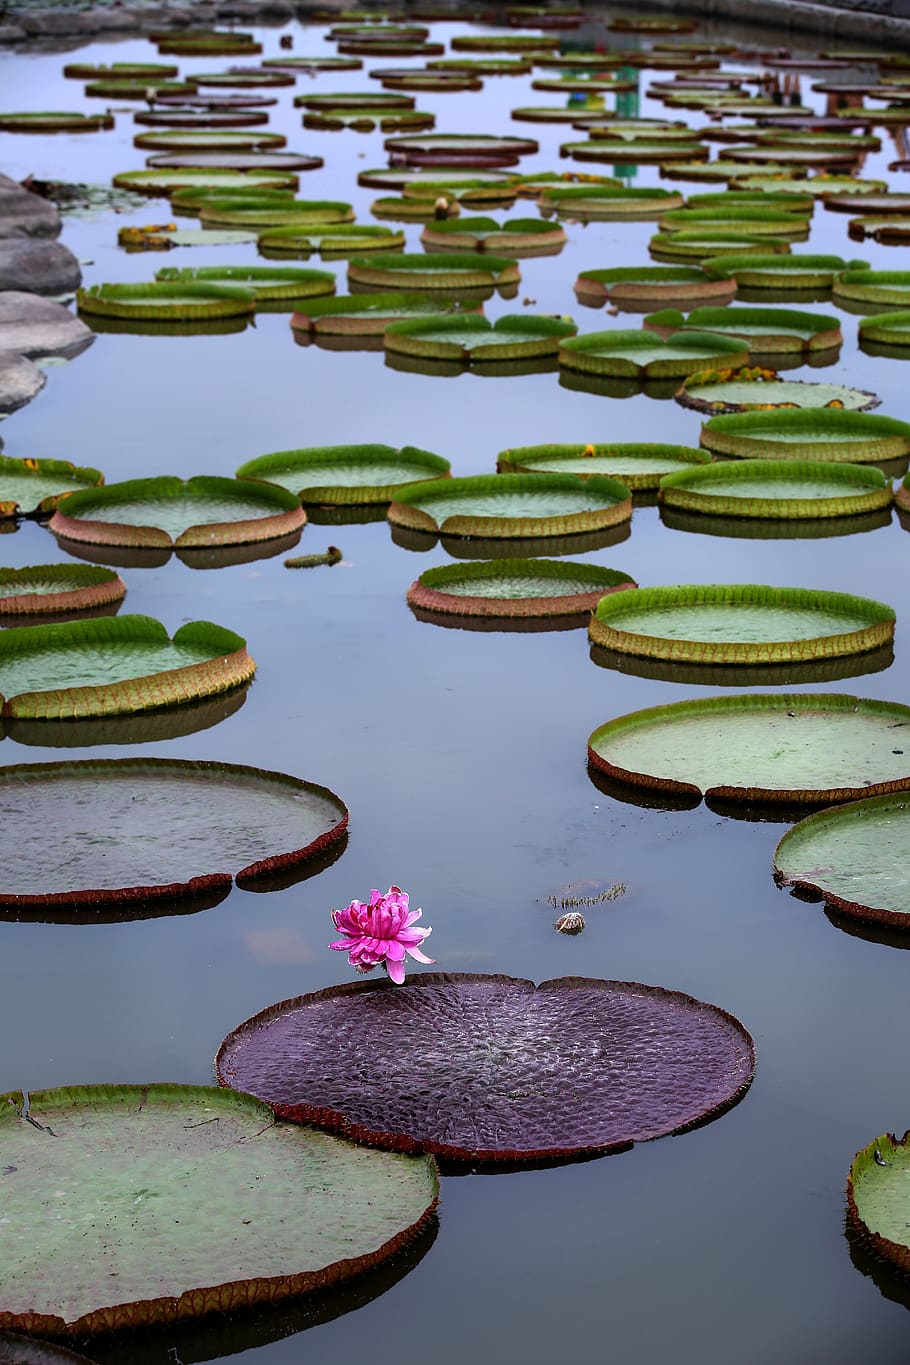 company, the white lotus, lotus, pond, nature, plants, water lilies, summer, lake, garden